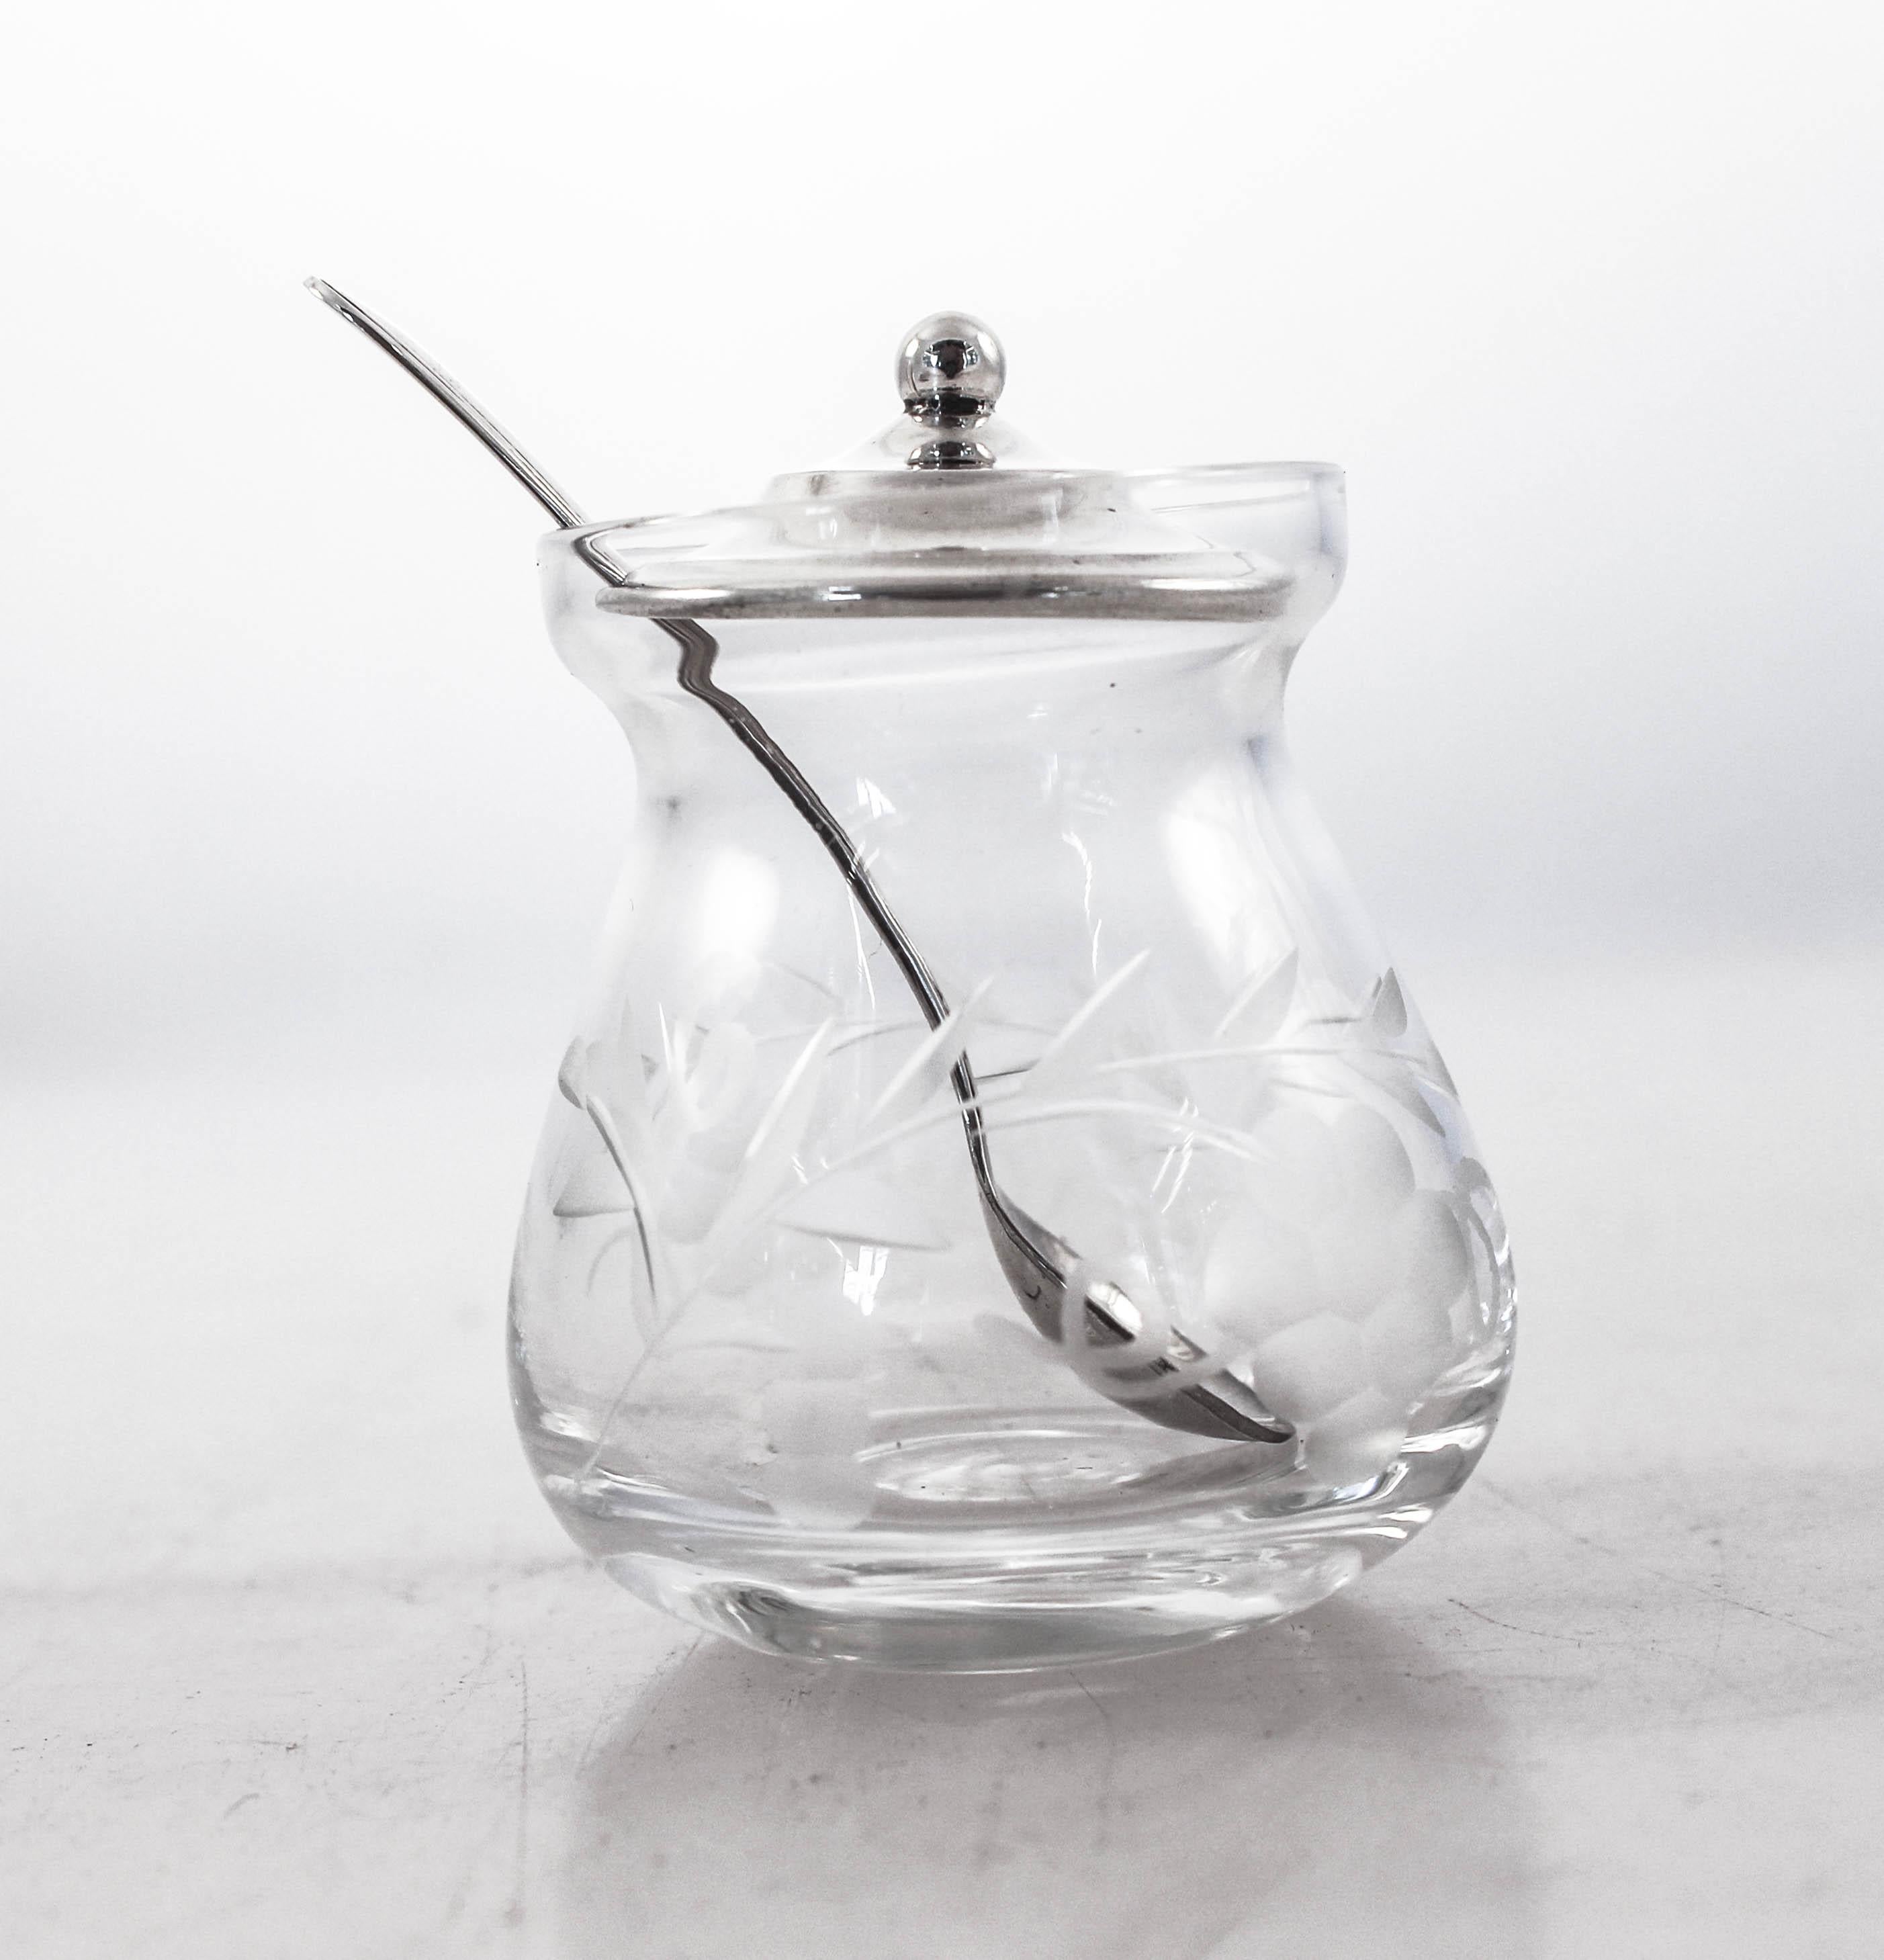 A beautiful and delicate crystal mustard jar with a sterling silver lid and spoon. The crystal has an acid-etched design of leaves and vines. The sterling silver lid and spoon are simple and have no decoration. A nice juxtaposition from the old